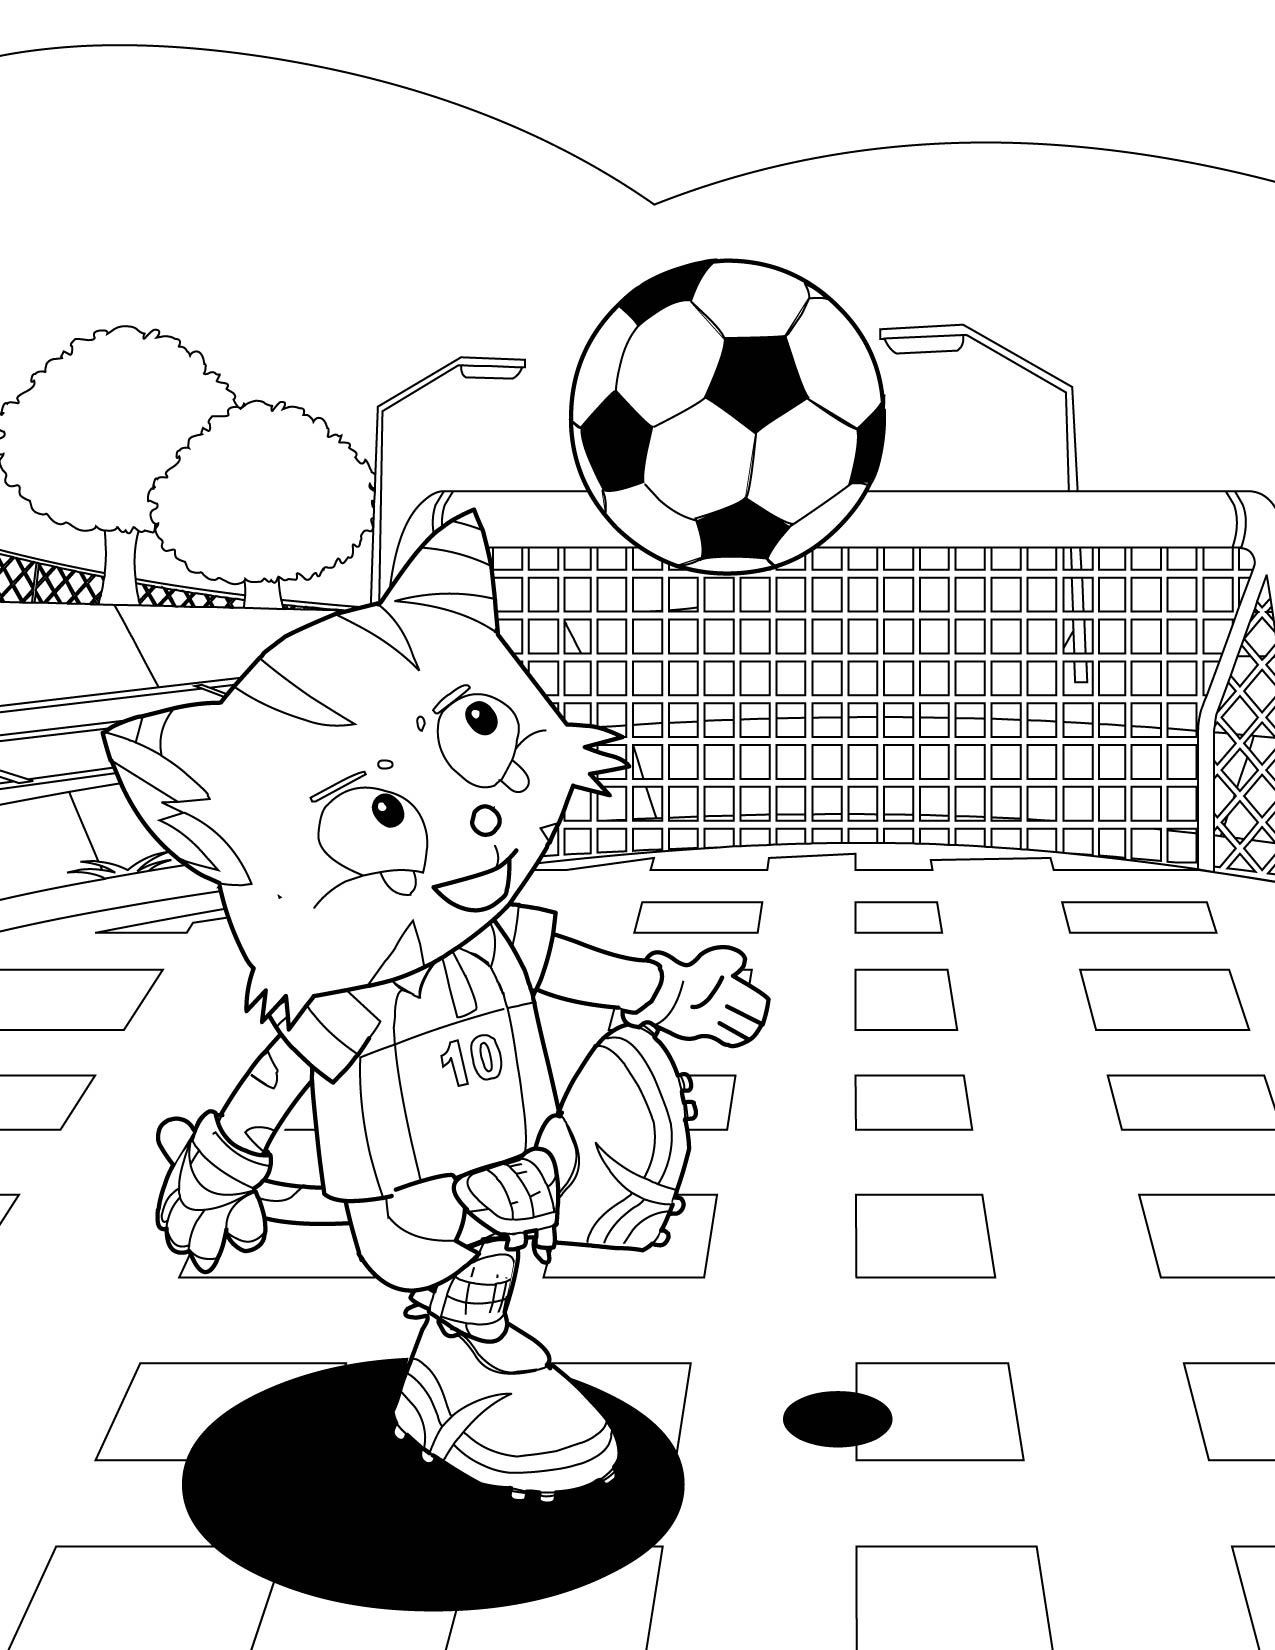 Soccer Coloring Pages (4) - Coloring Kids